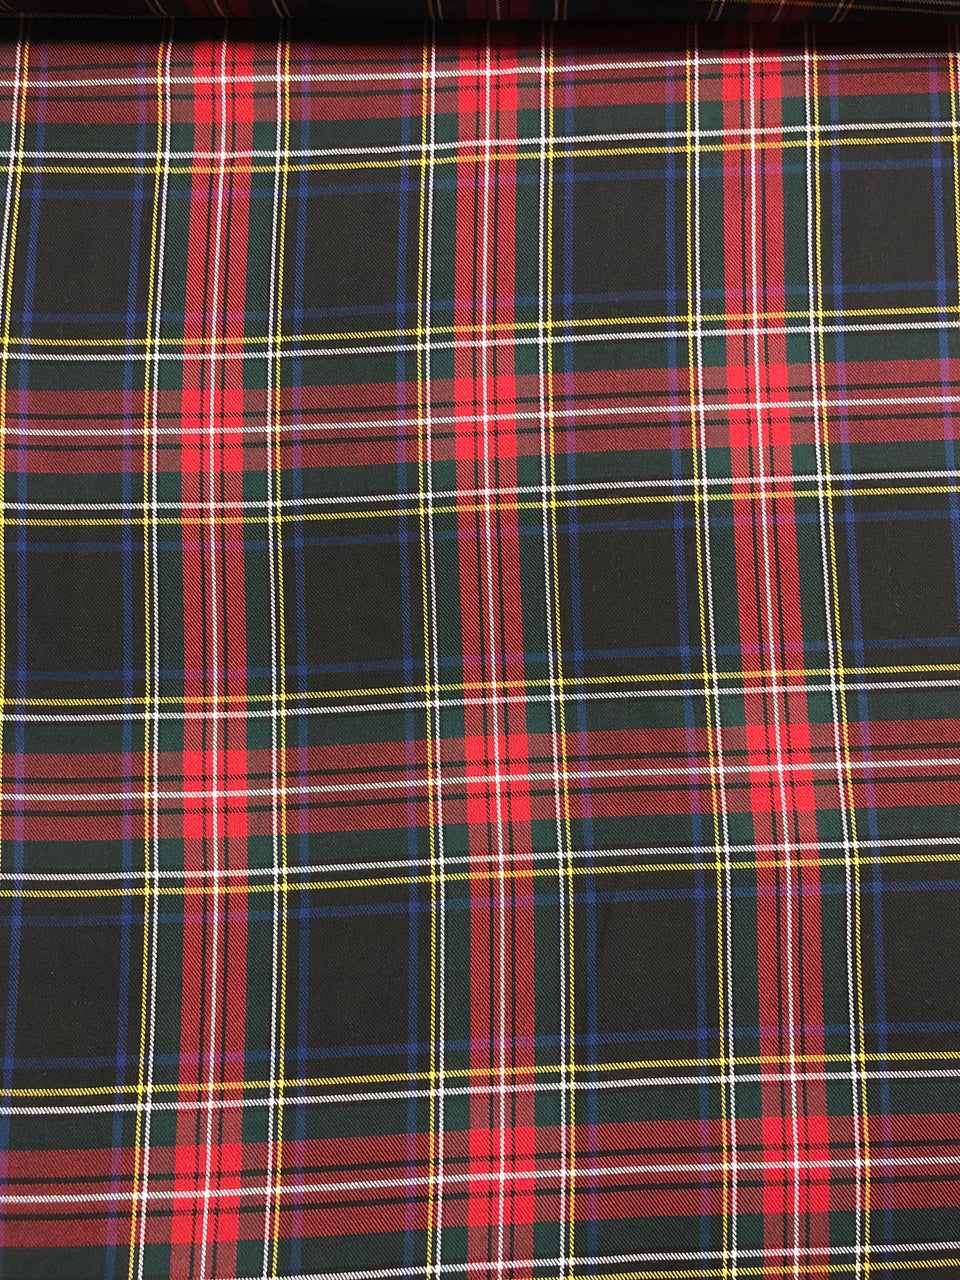 Grey and Red Tartan – Affordable Textiles